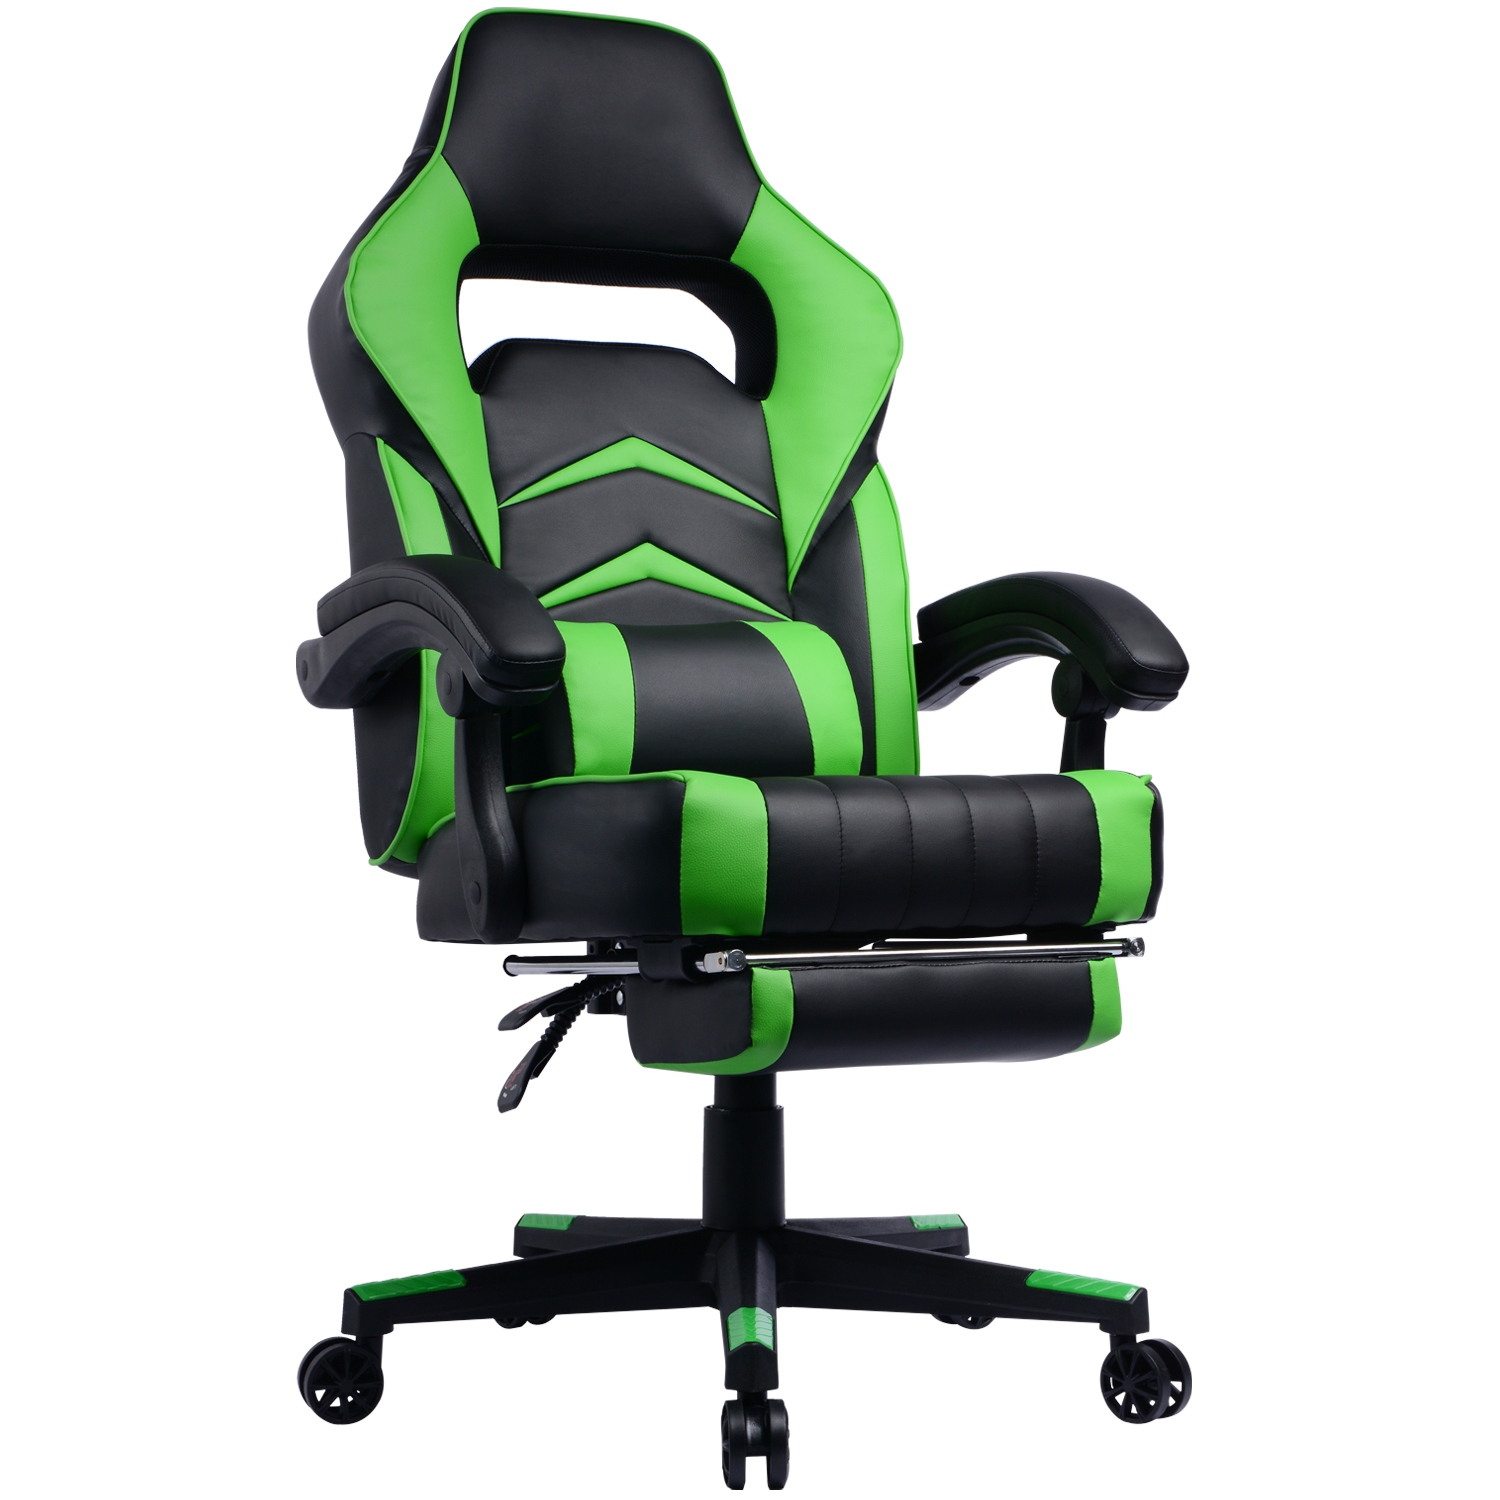 GamingChair Ergonomic PU Padded Leather Racing Gaming Chair with Extendable Footrest and Reclining Backrest (Green and Black)